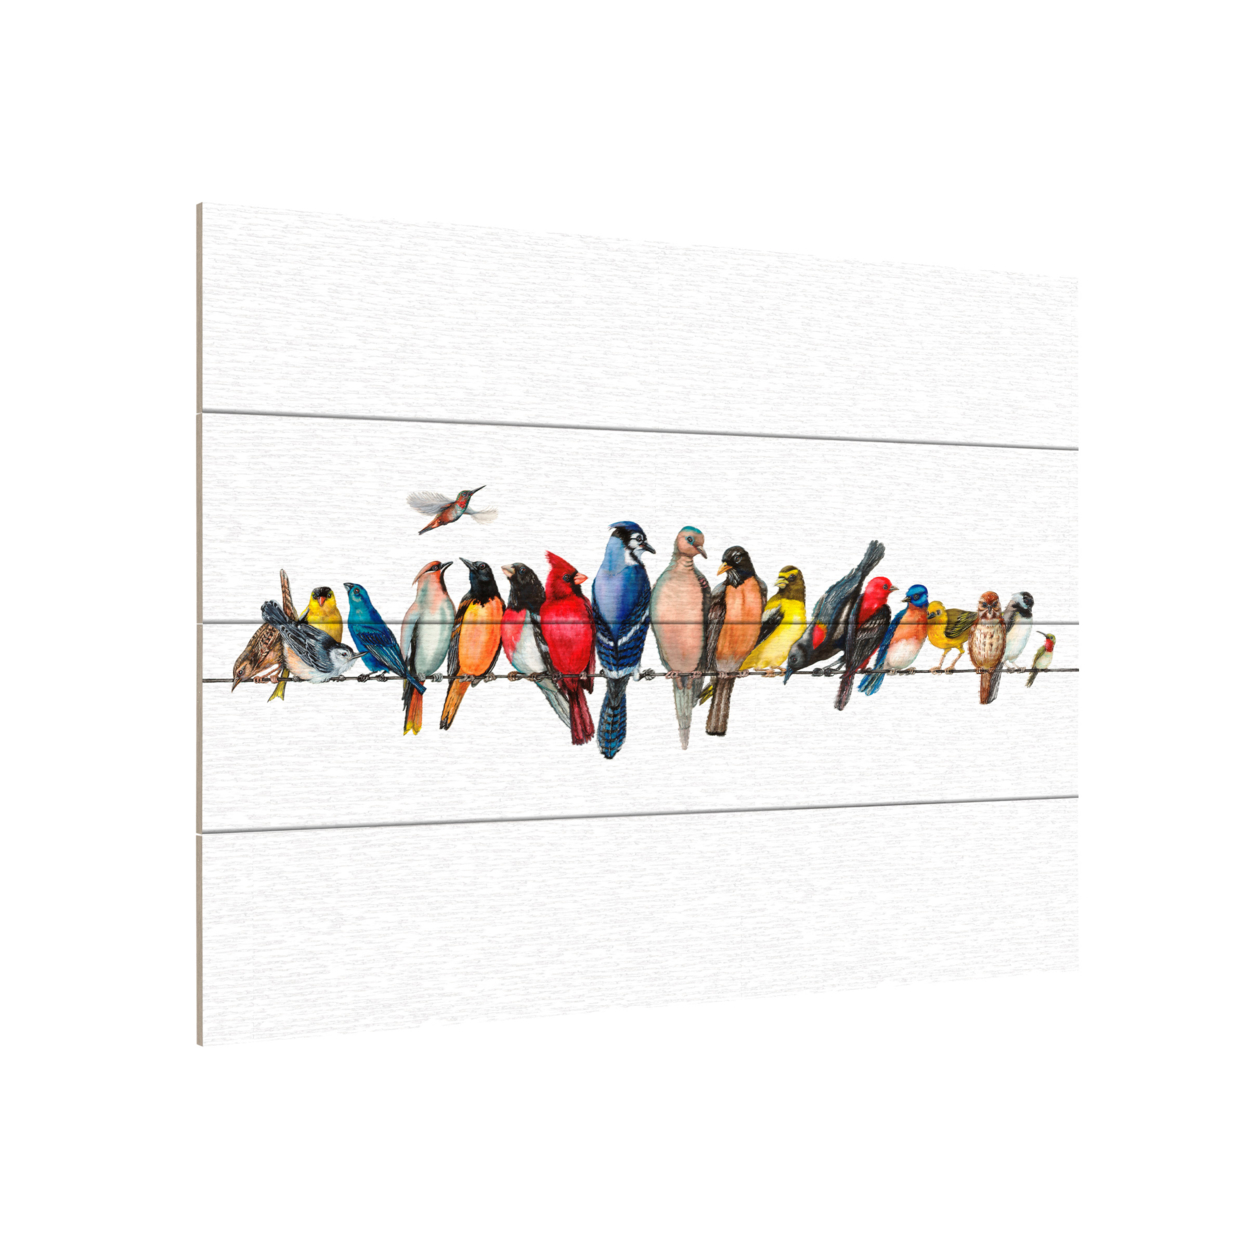 Wall Art 12 X 16 Inches Titled Large Bird Menagerie Ii Ready To Hang Printed On Wooden Planks